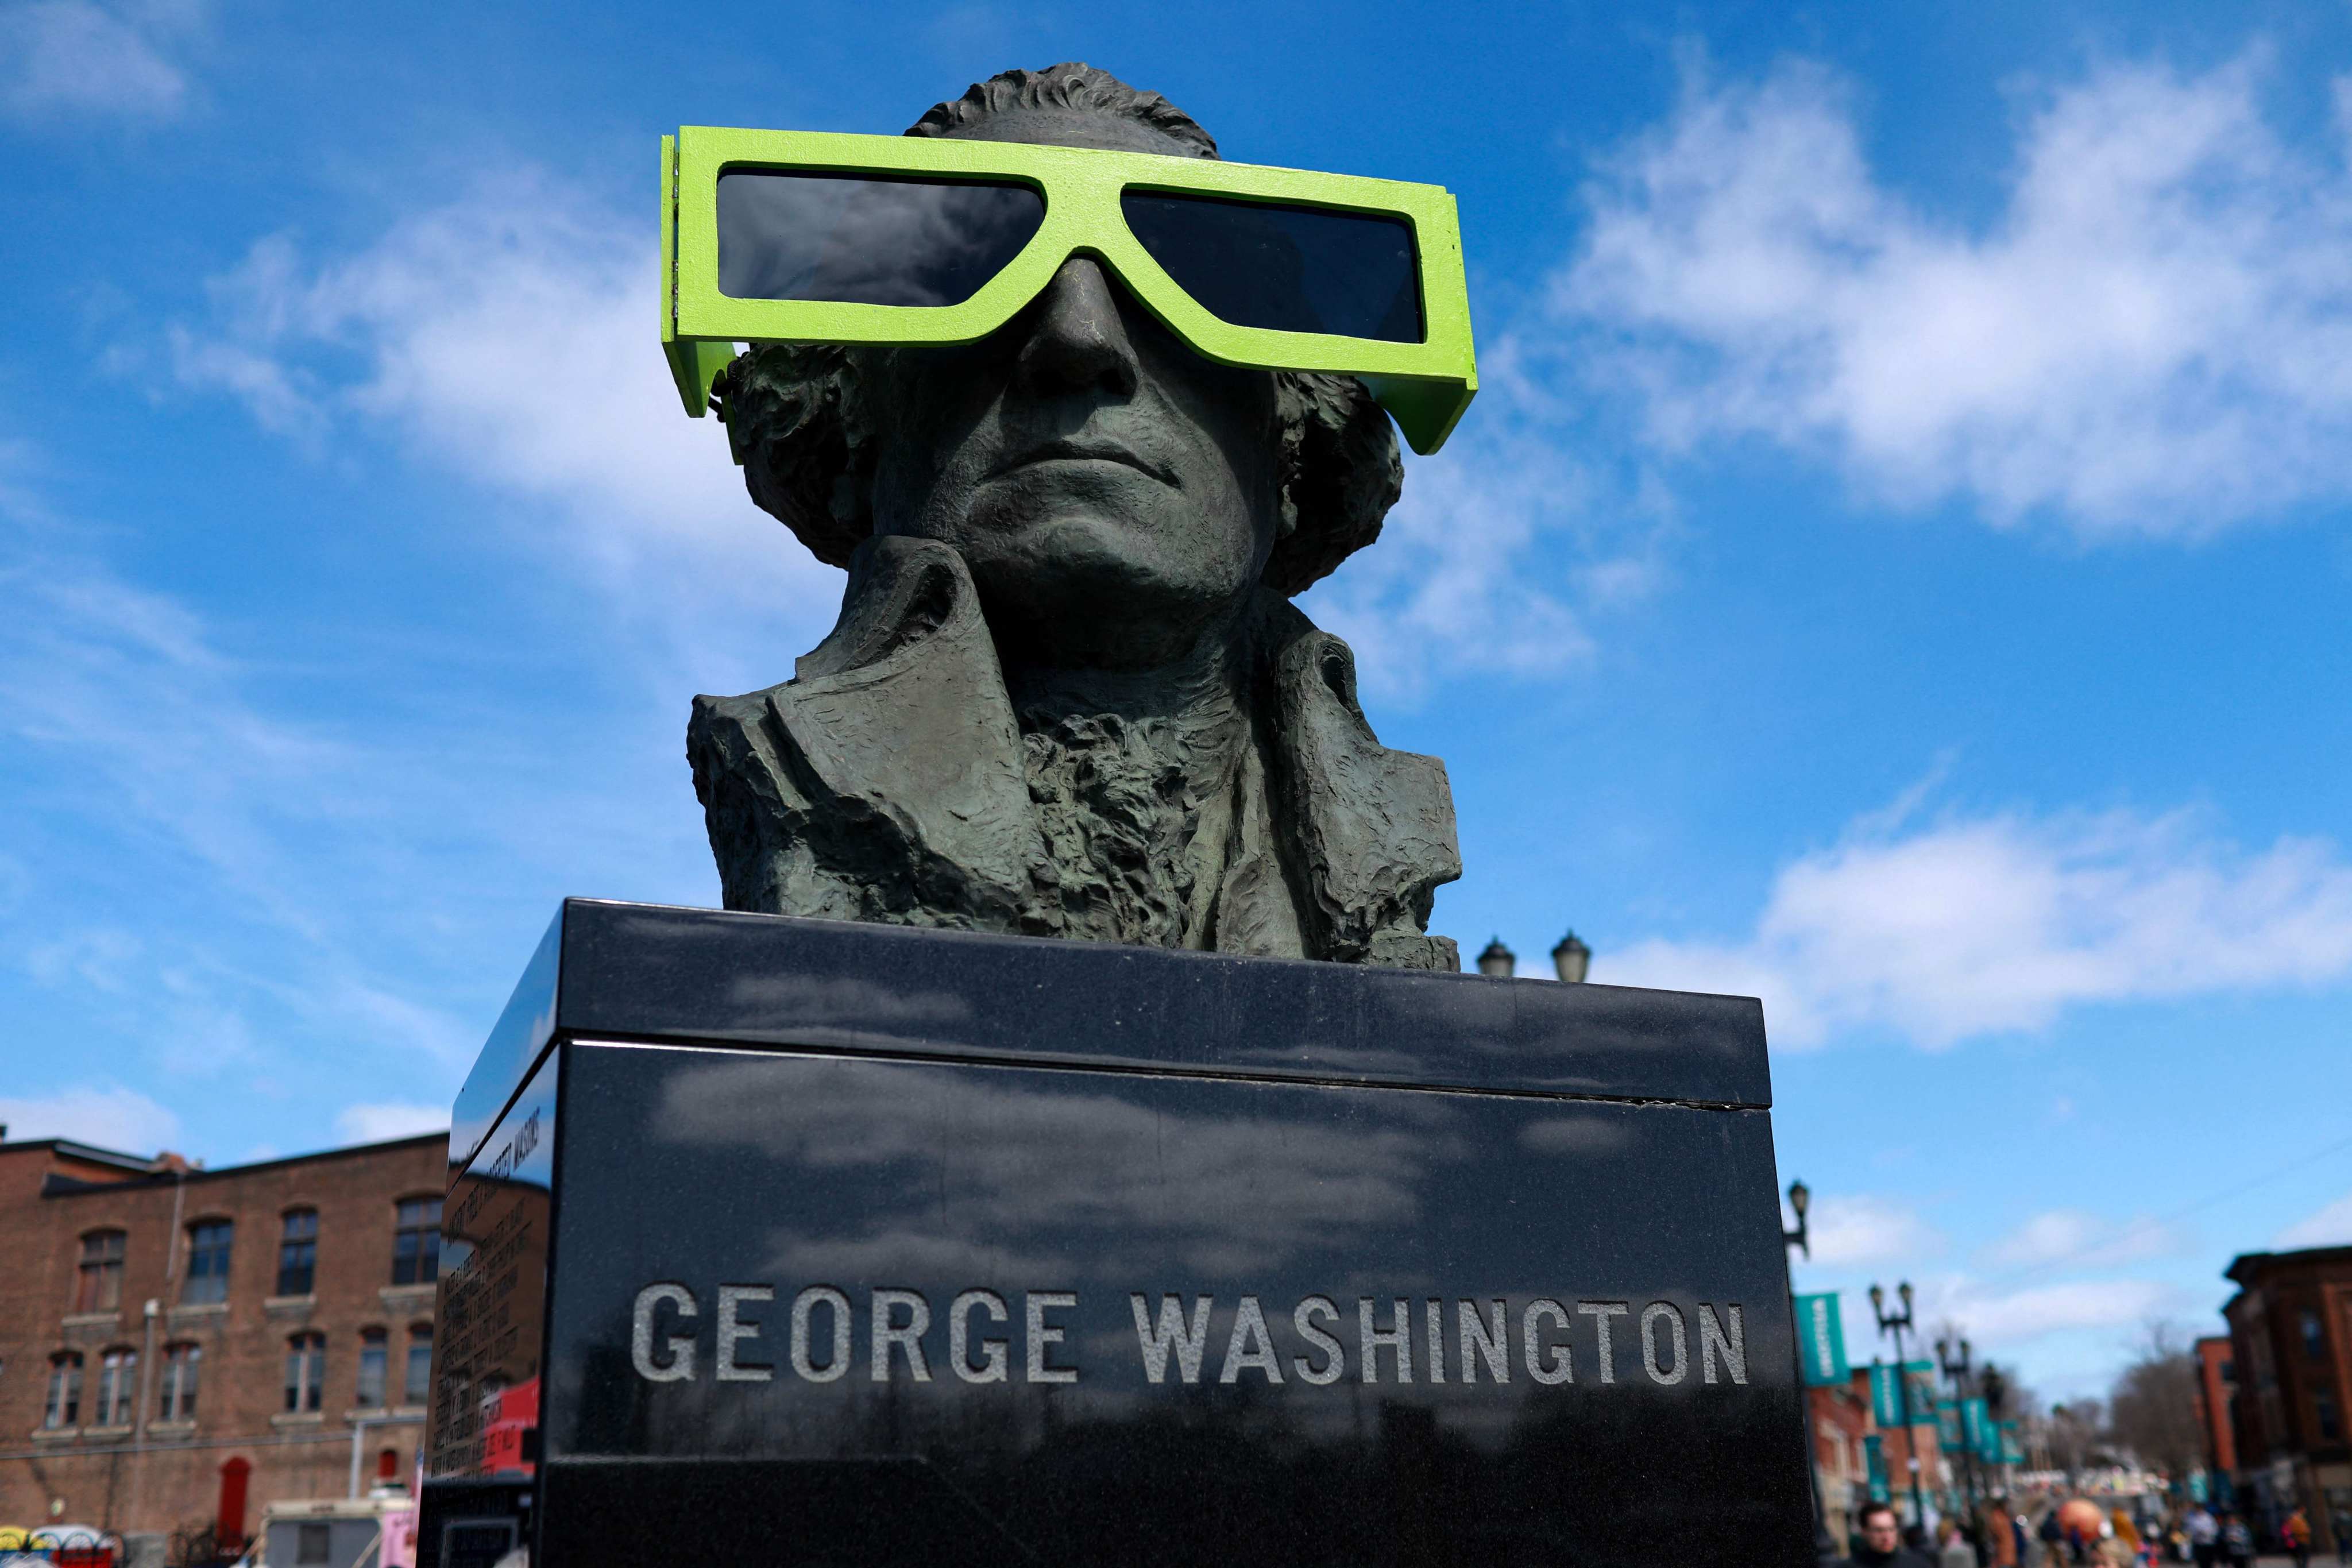 Eclipse glasses on a statue of George Washington, in Houlton, Maine. Photo: AFP